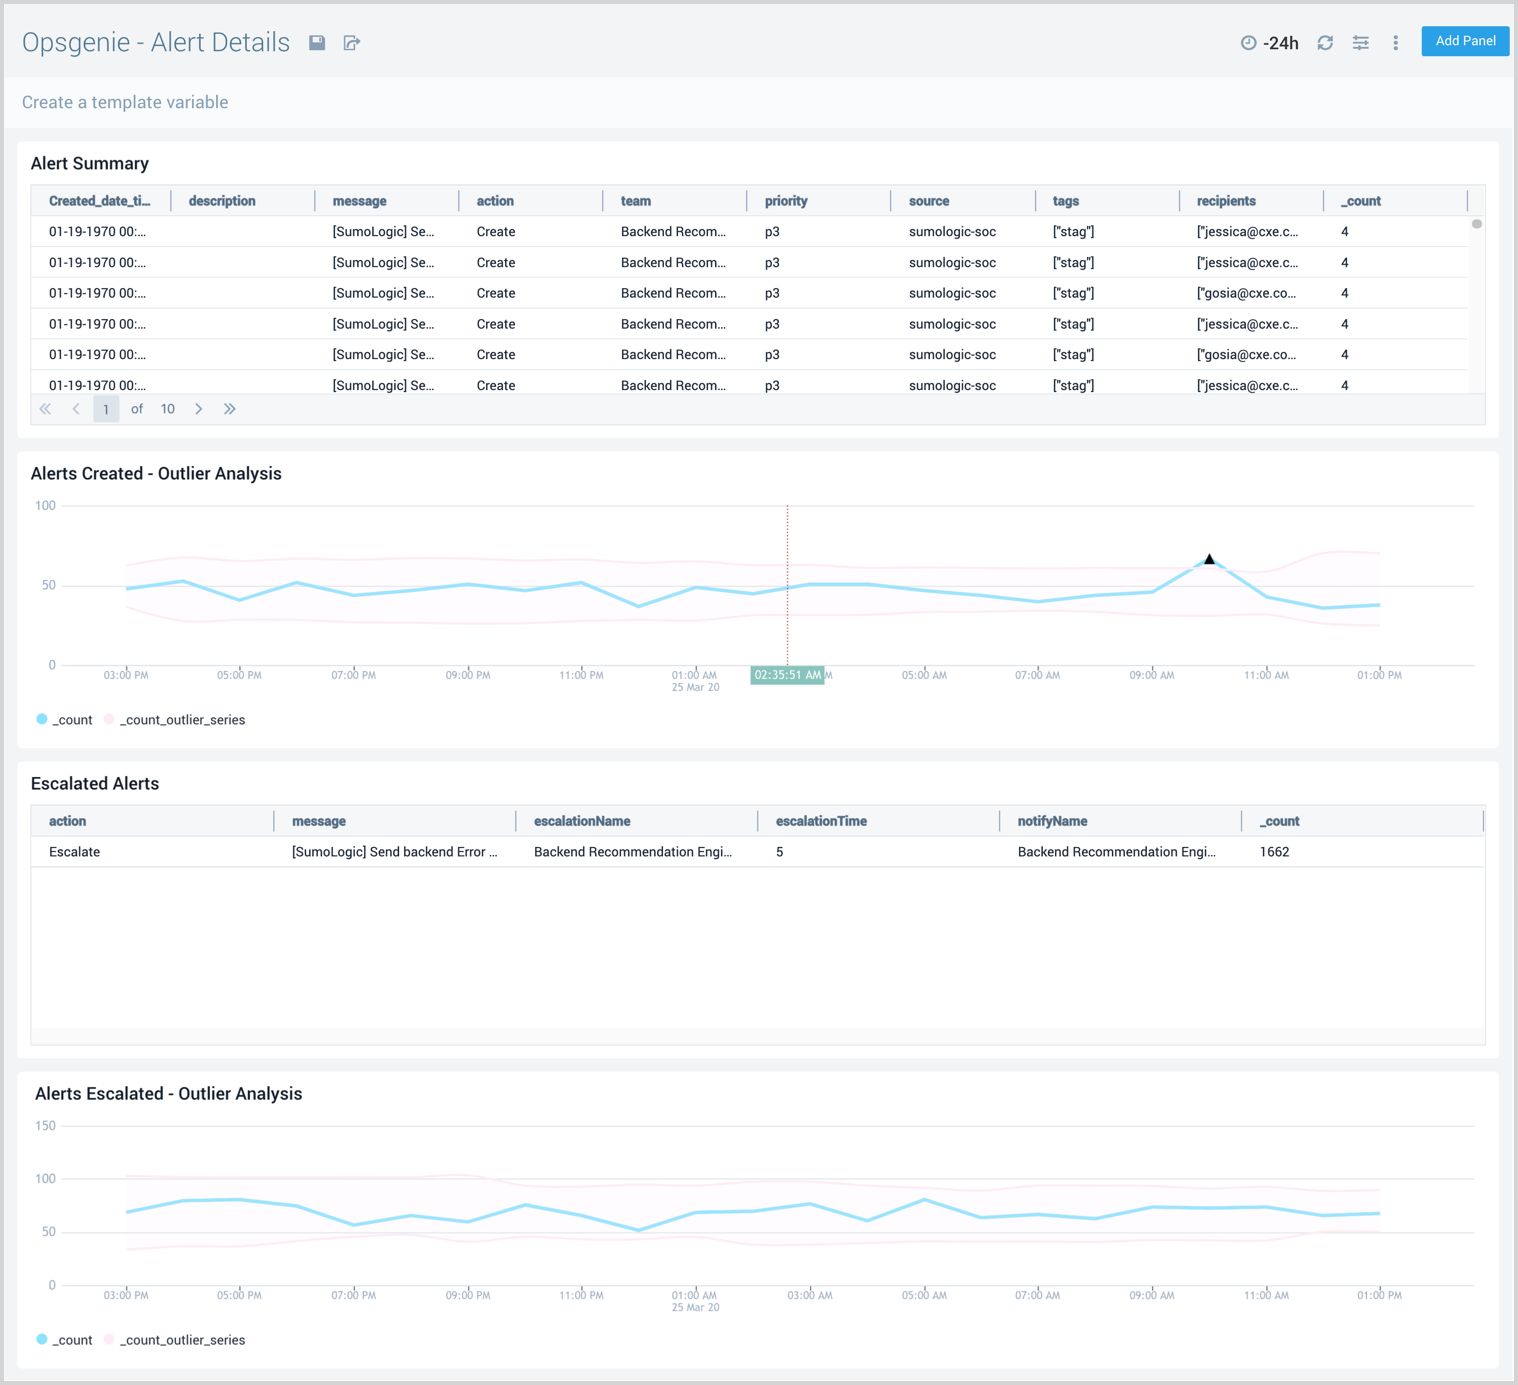 Visualize rich analytics for alert outliers, escalated alerts, and alert summaries.